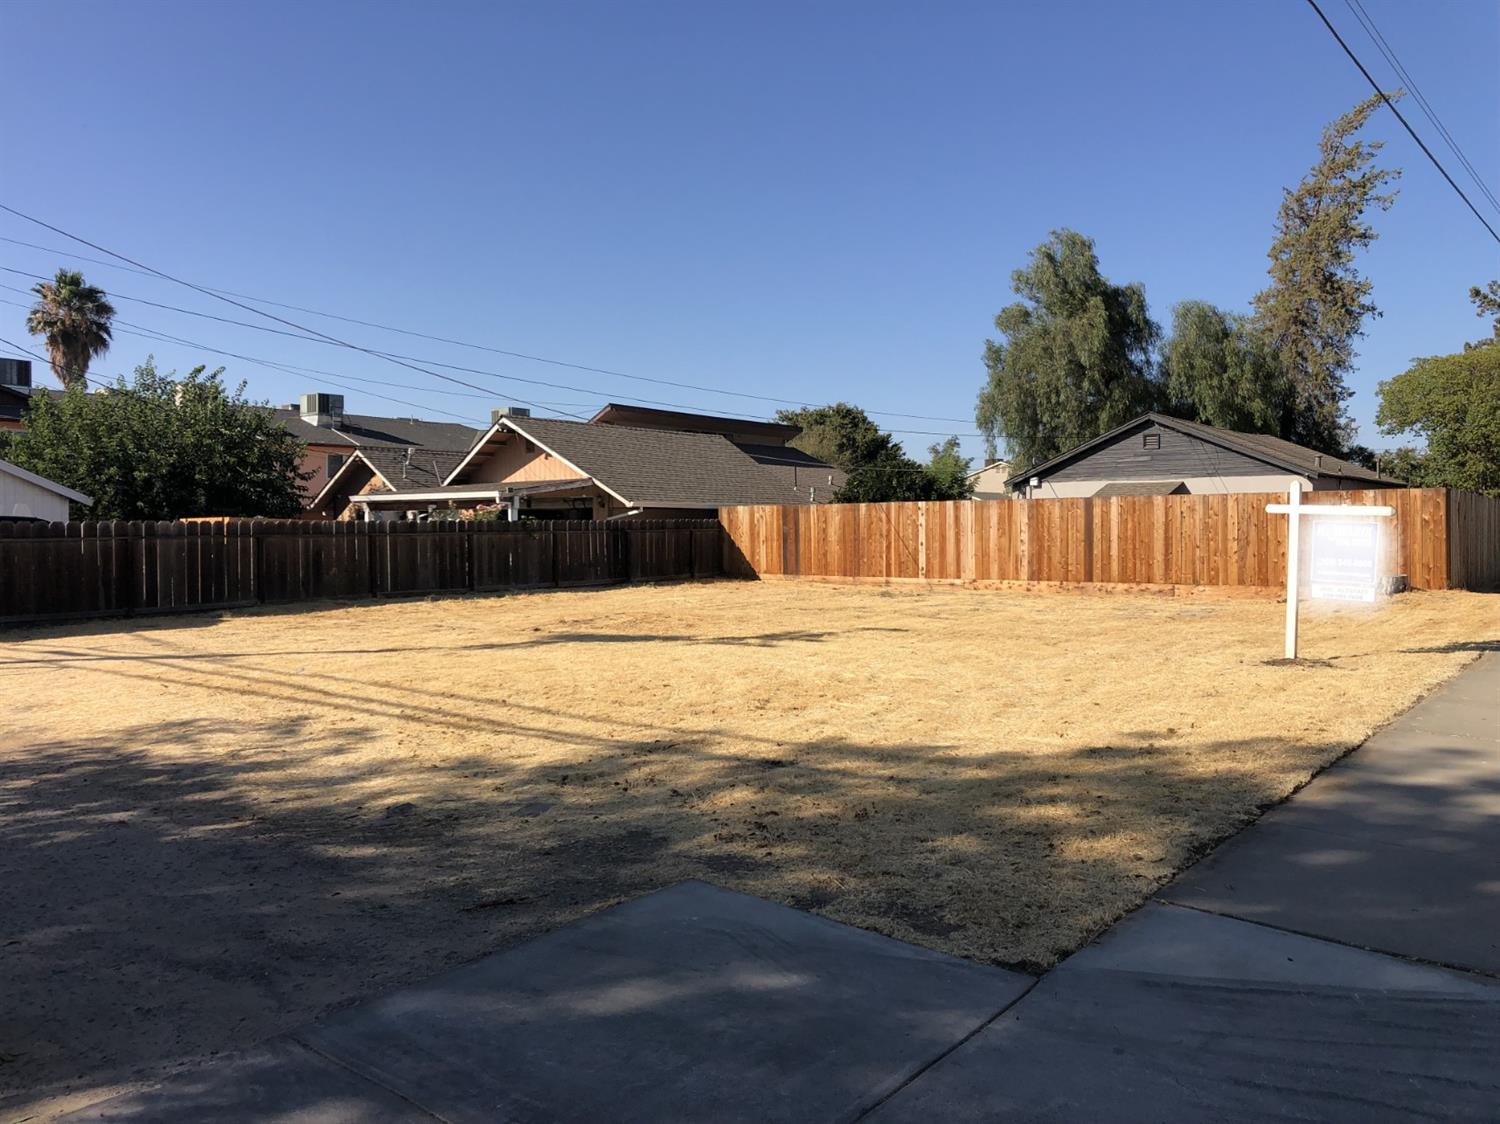 Photo of 12717 Welch St in Waterford, CA